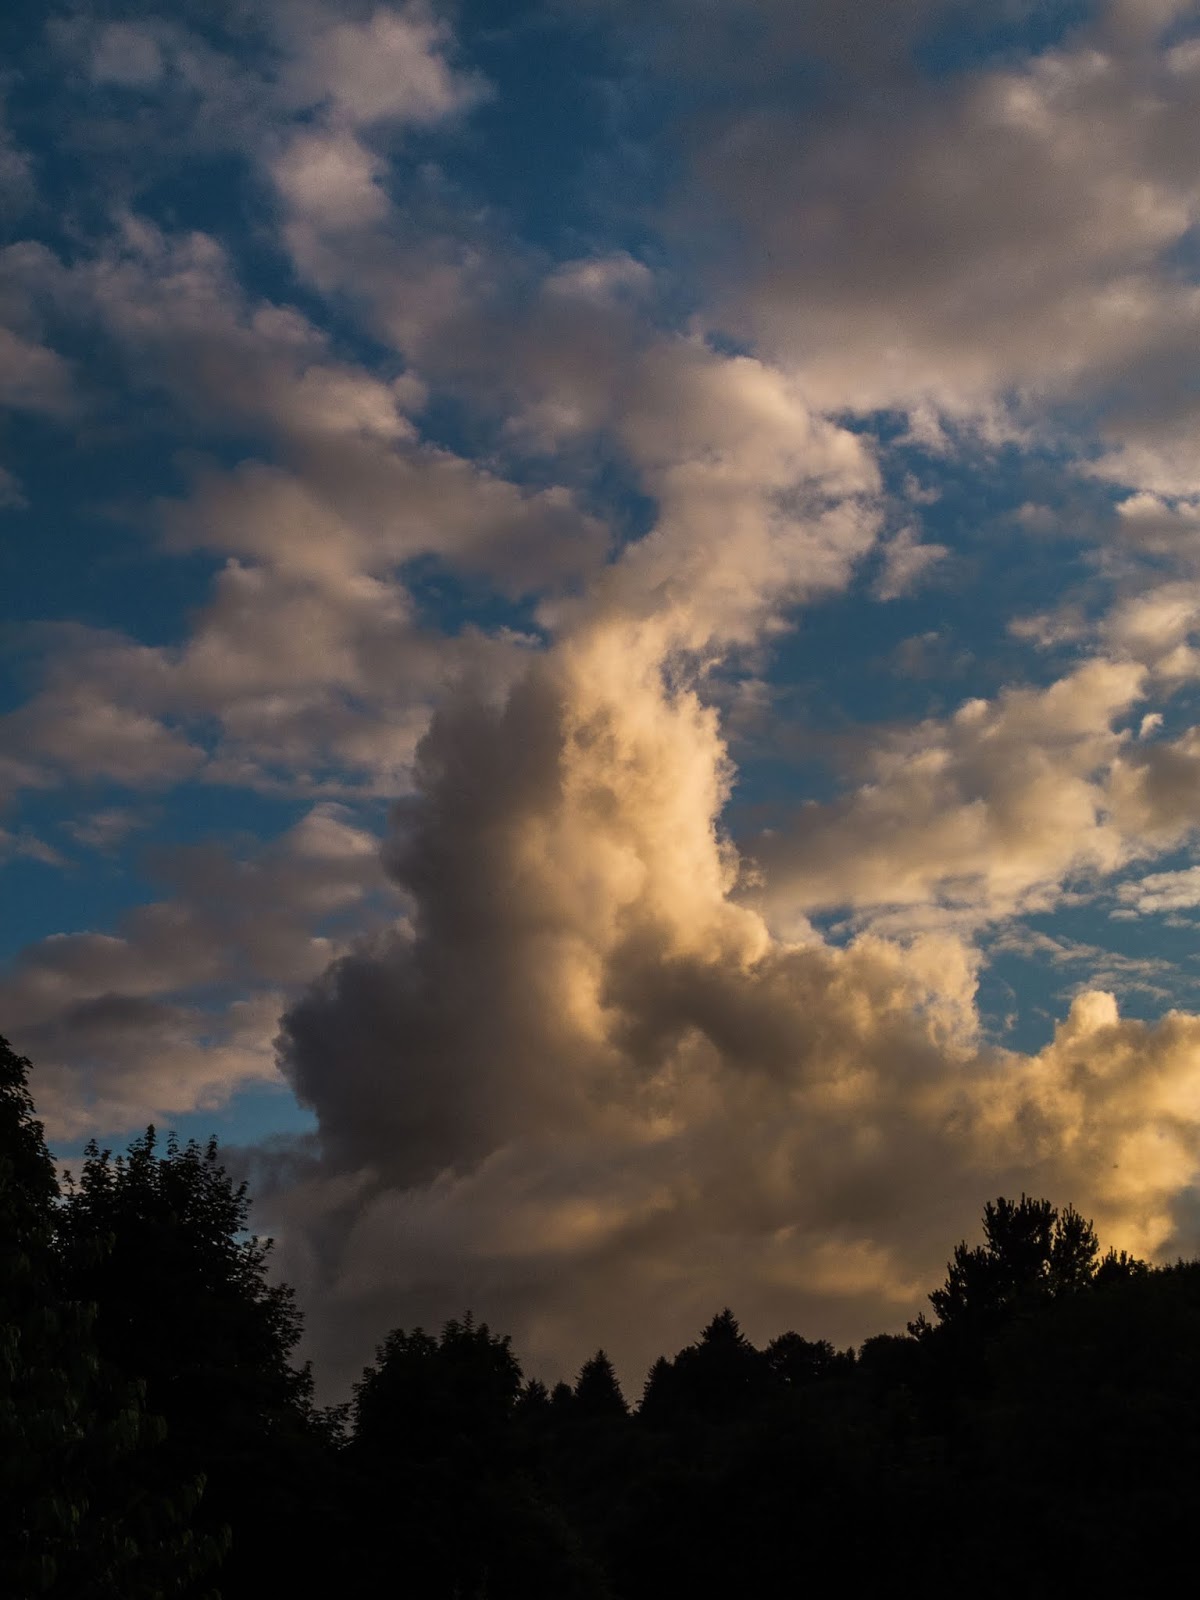 A tree landscape with a big and fluffy sunset cloud on a blue sky.